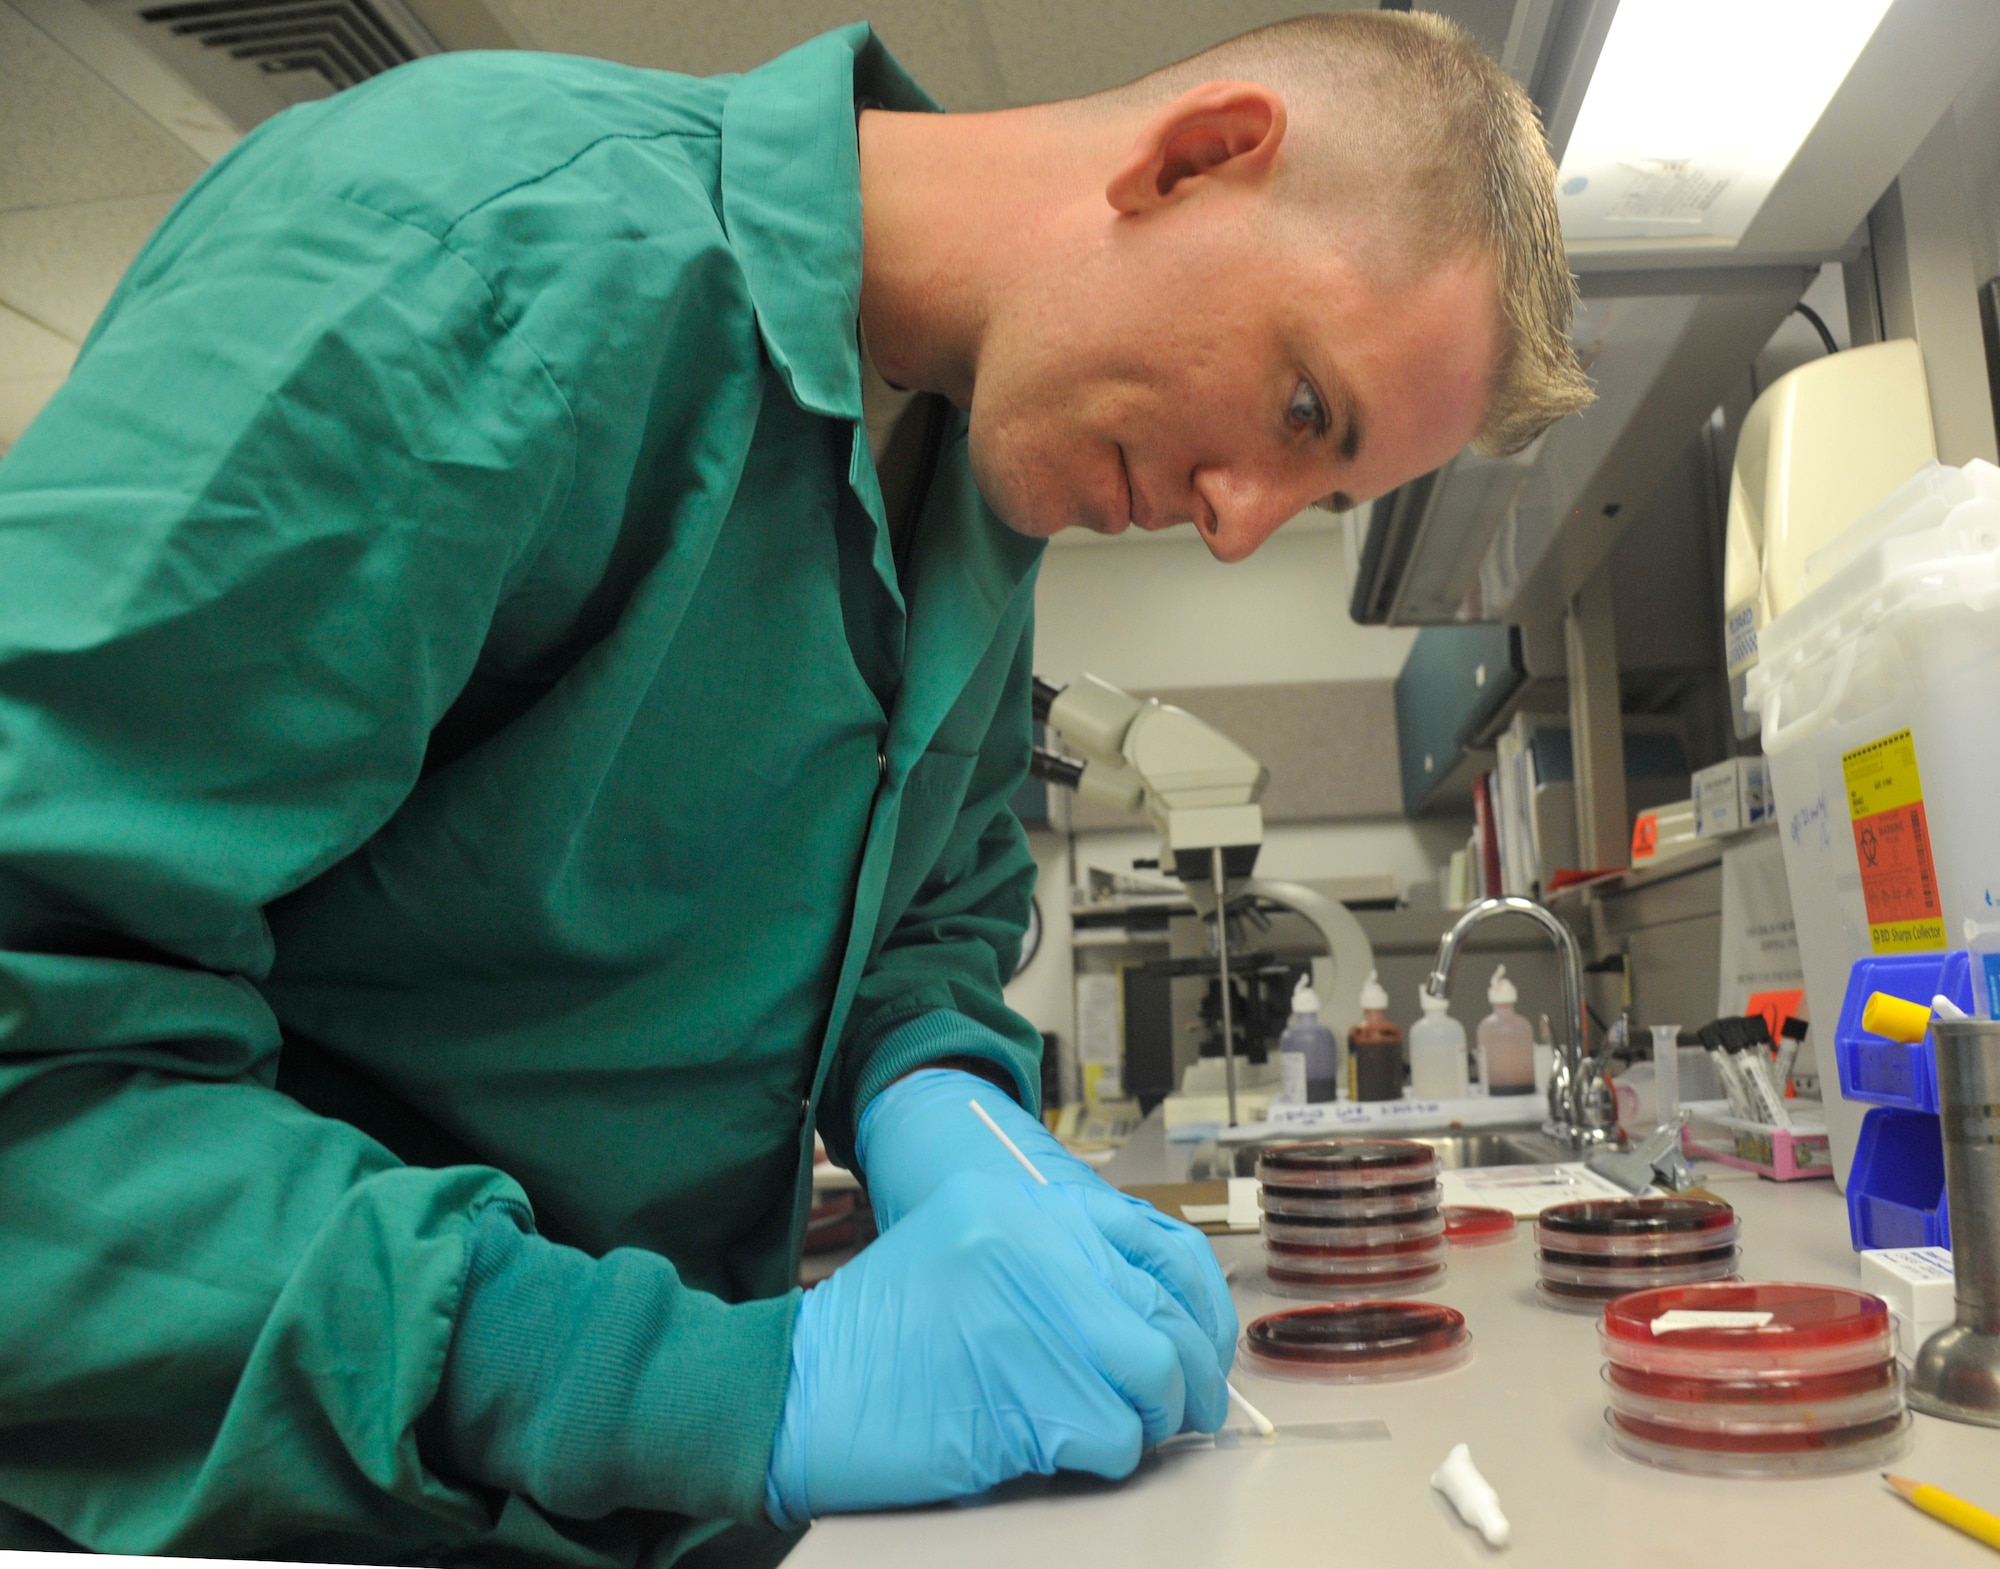 U.S. Air Force Staff Sgt. Jon Ringenoldus, 509th Medical Support Squadron medical laboratory technician, performs a catalase test at Whiteman Air Force Base, Mo., May 13, 2014. This test is done to differentiate between staphylococci (catalase-positive) from streptococci (catalase-negative) bacteria. (U.S. Air Force photo by Airman 1st Keenan Berry/Released) 